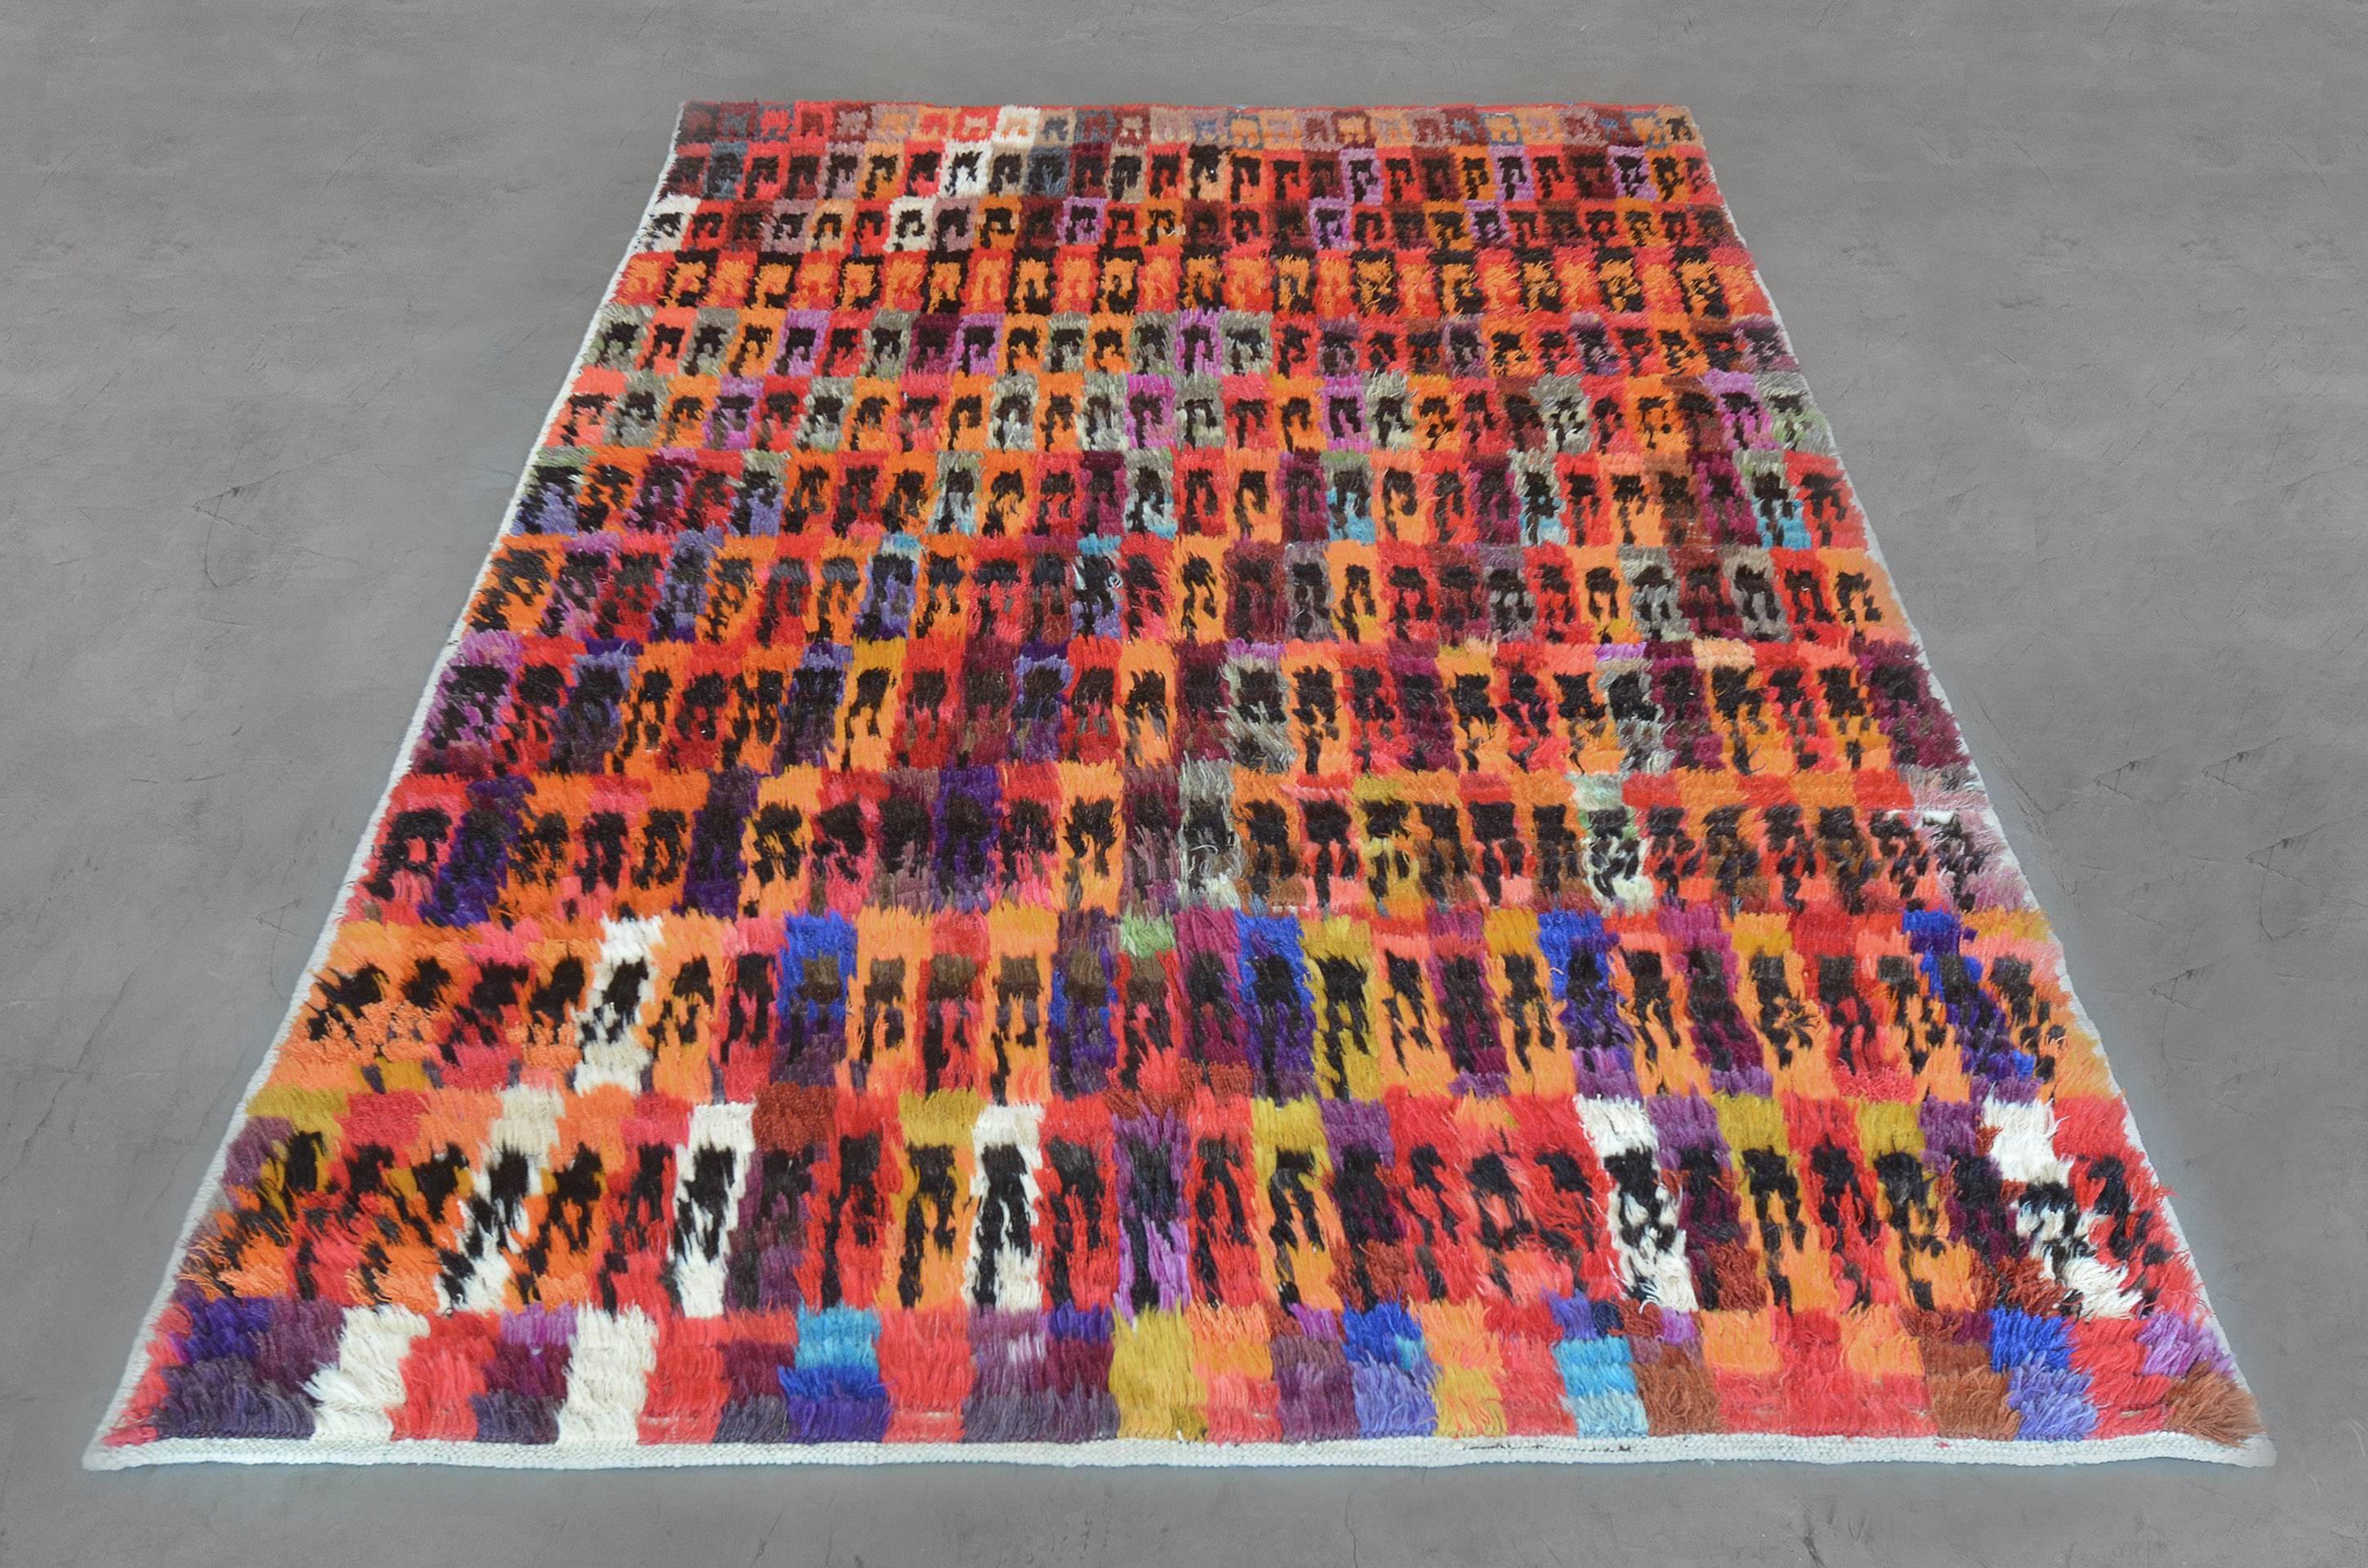 This hand knotted, high pile colorful Turkish wool rug from the late 20th century has a striking, prismatic design. Its intriguing colors and rhythmic pattern gives the 6’4”x 8’10” rug a sense of vibrancy and liveliness.